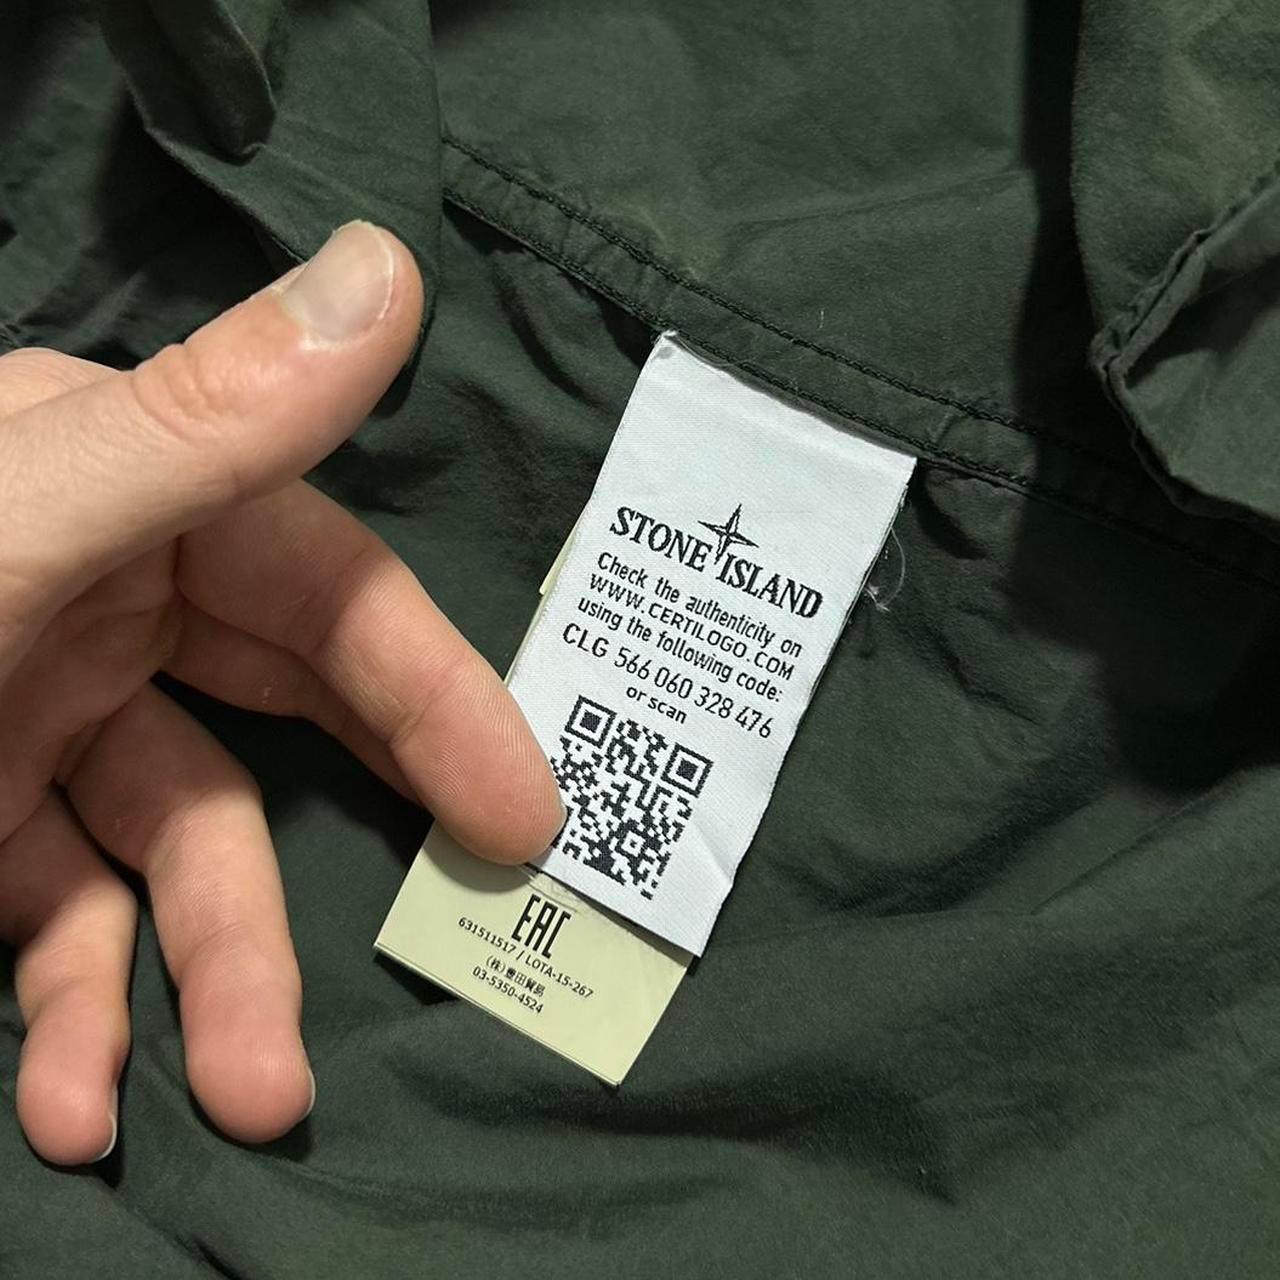 Stone Island Forest Green Shirt - Known Source